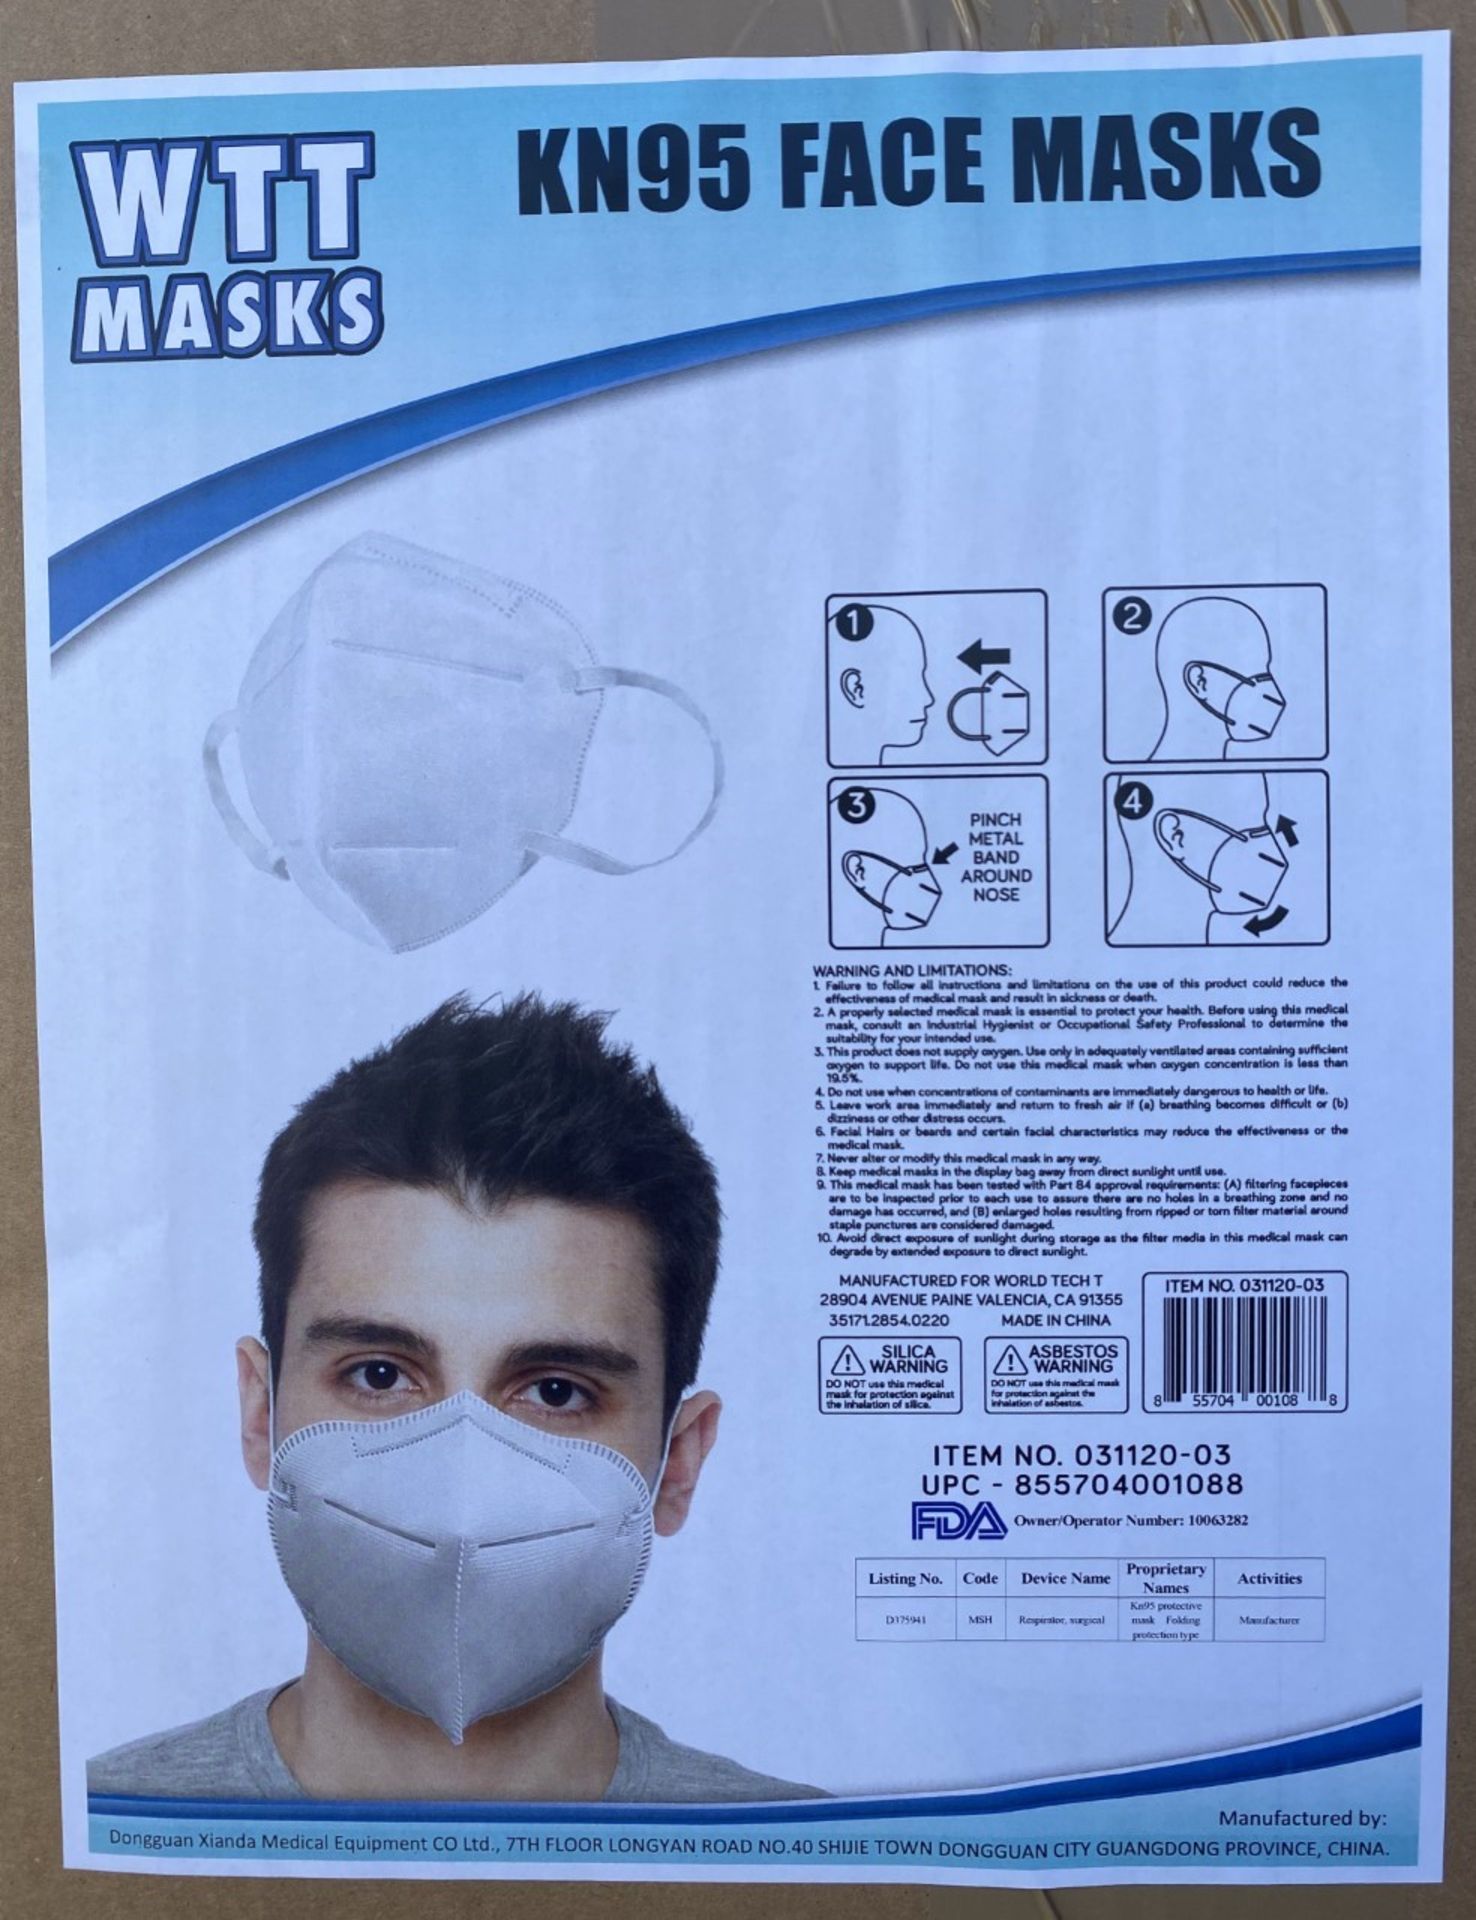 Boxes of KN95 Face Masks (Sold by the Box, Bid Multiplied by 83) Face Masks Marked KN95 But NOT